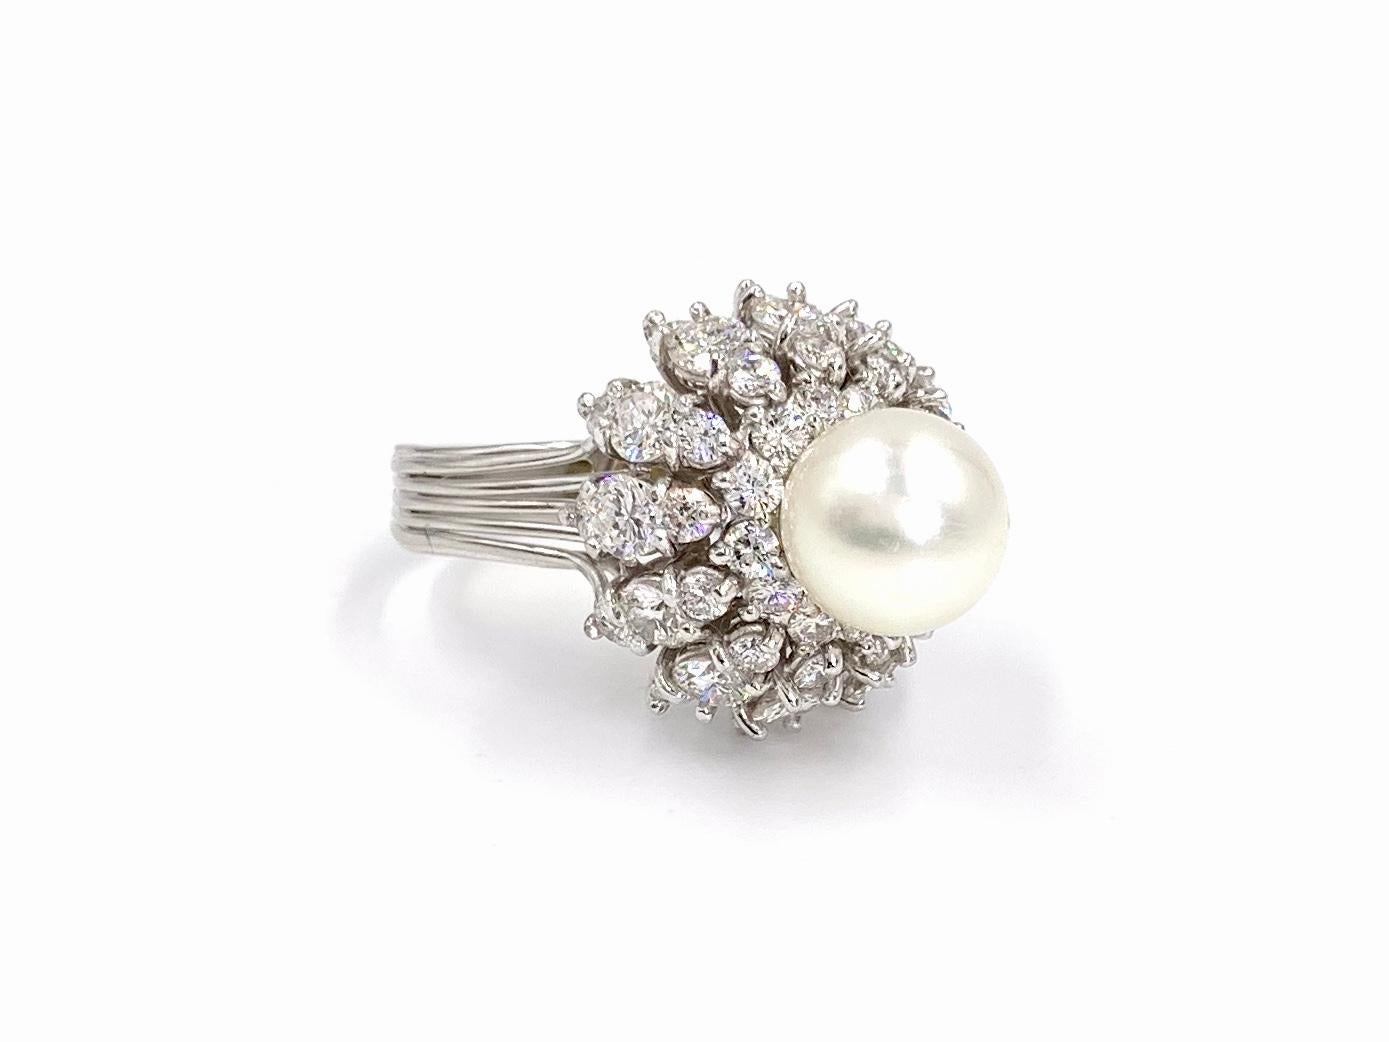 Circa 1940's this Edwardian inspired platinum cocktail ring features approximately 3 carats of round diamonds surrounding a 9-9.5mm round cultured pearl. This elegant ring is eye catching with a high profile and a generous amount of sparkle. Diamond